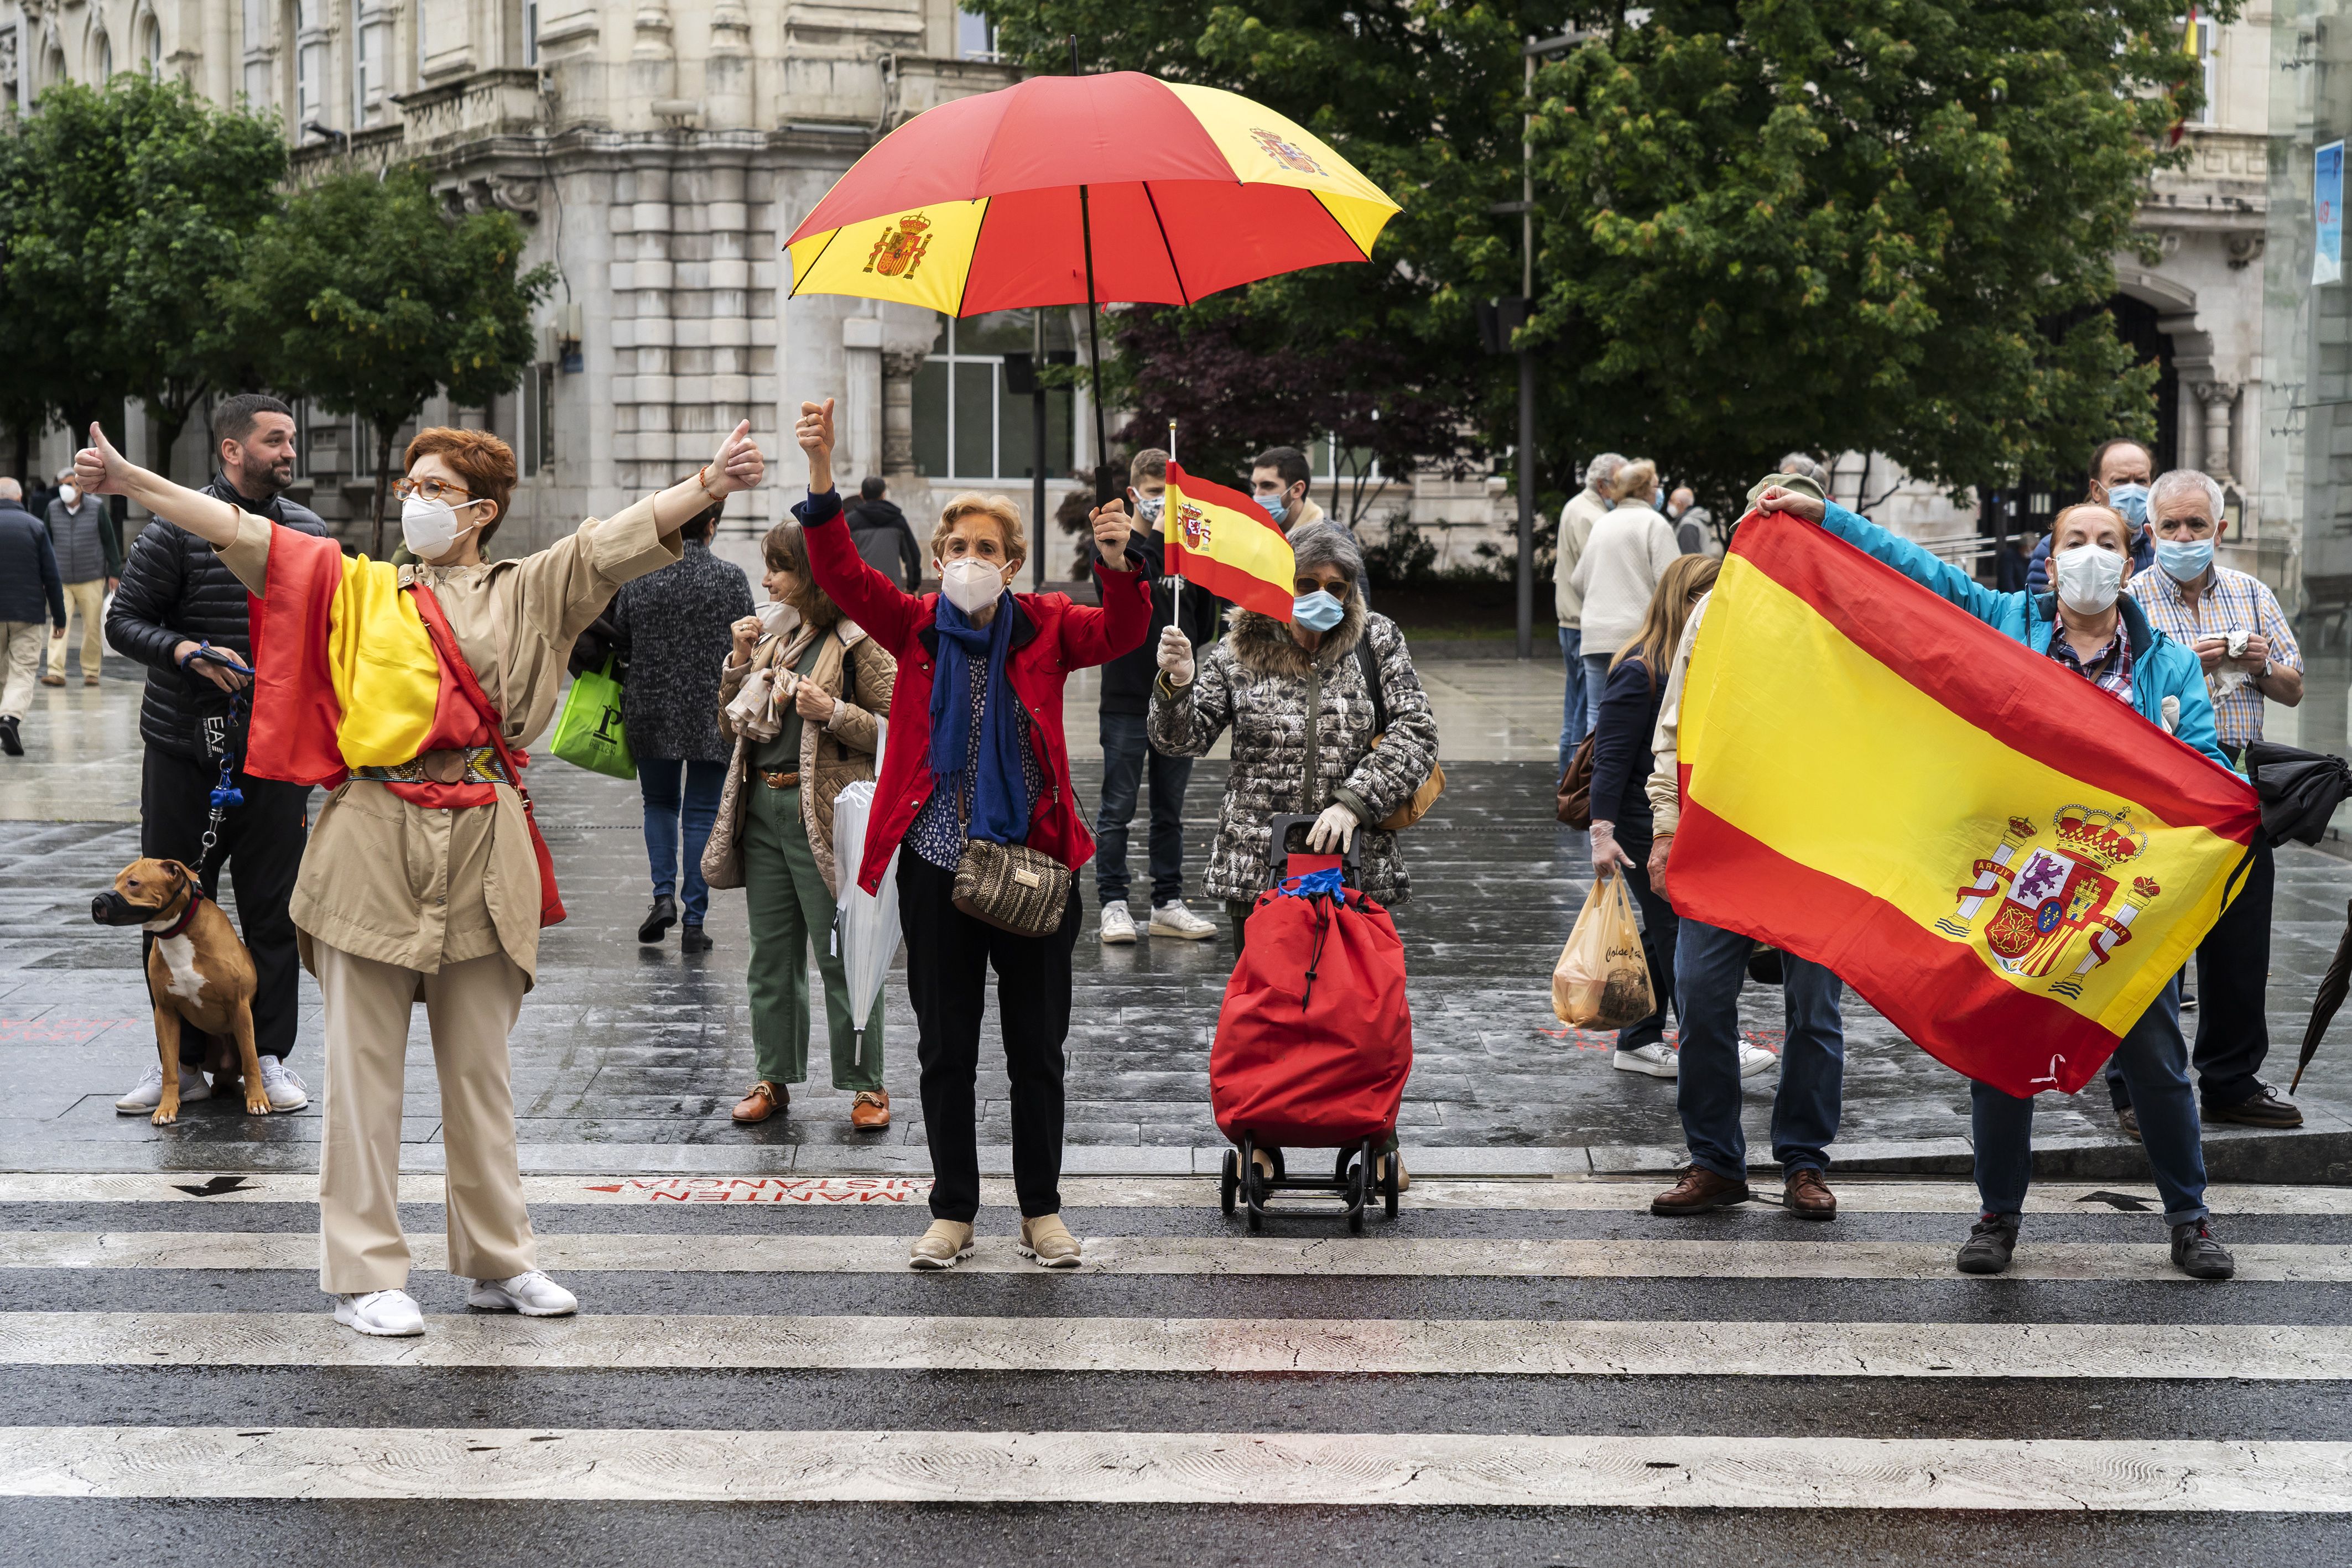 In this image, a group of people holding flags and umbrellas decorated with Spain's flag stand in a crosswalk